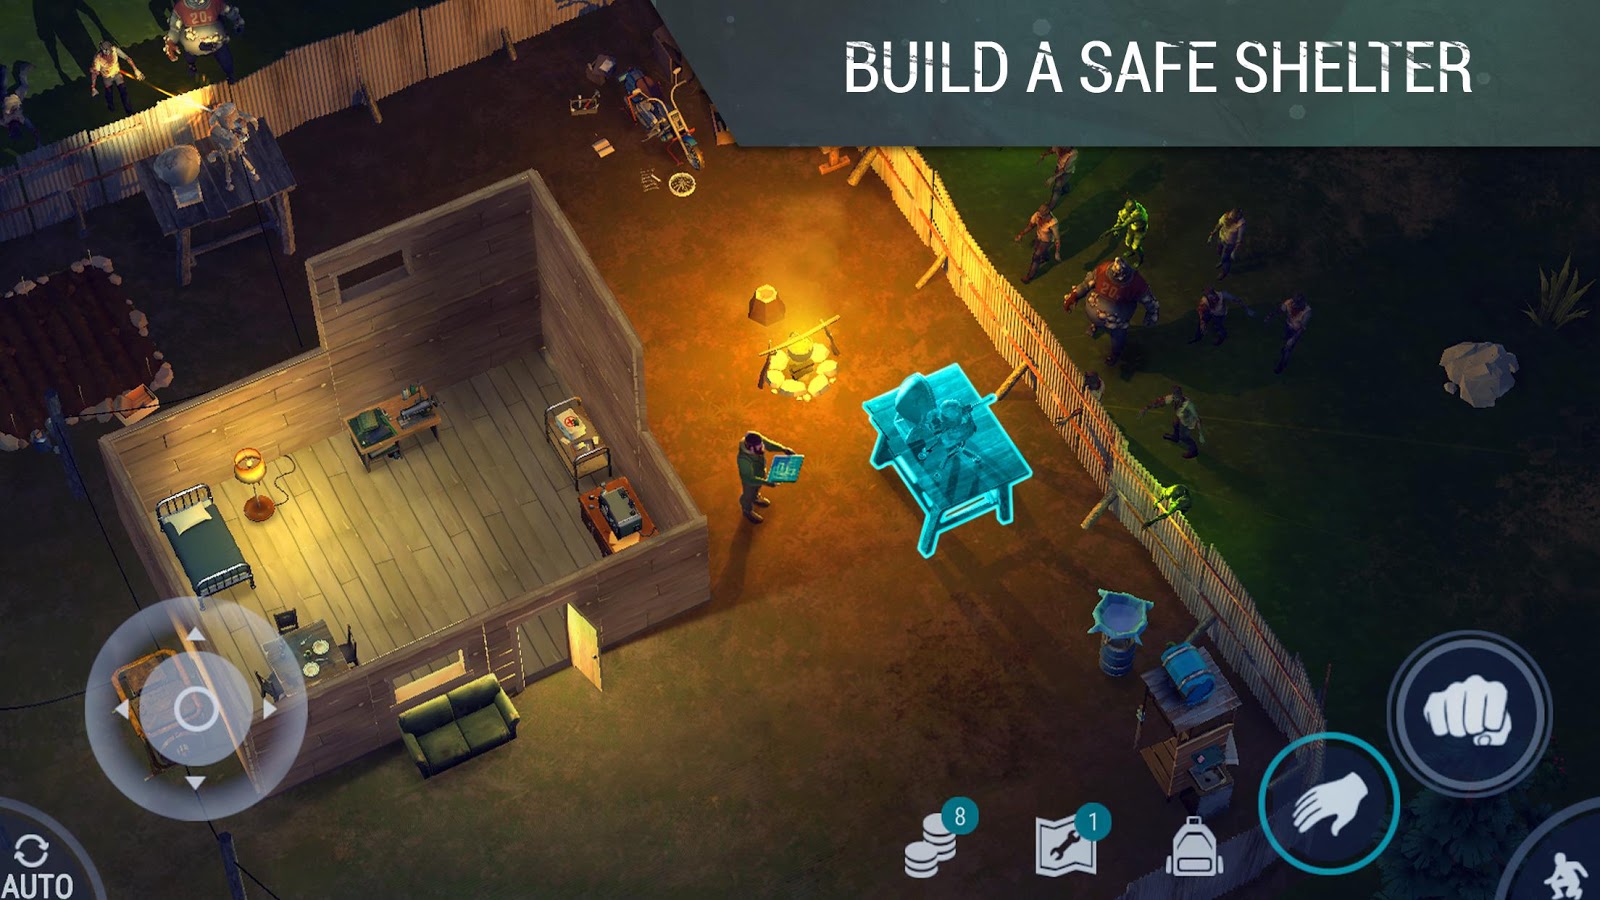 Download Last Day on Earth Survival MOD APK Terbaru Latest Version Last Day on Earth: Survival MOD APK v1.12.3 (Unlimited Money/Ammo/Free Craft/Pet Ready/lv99/chooper/More)